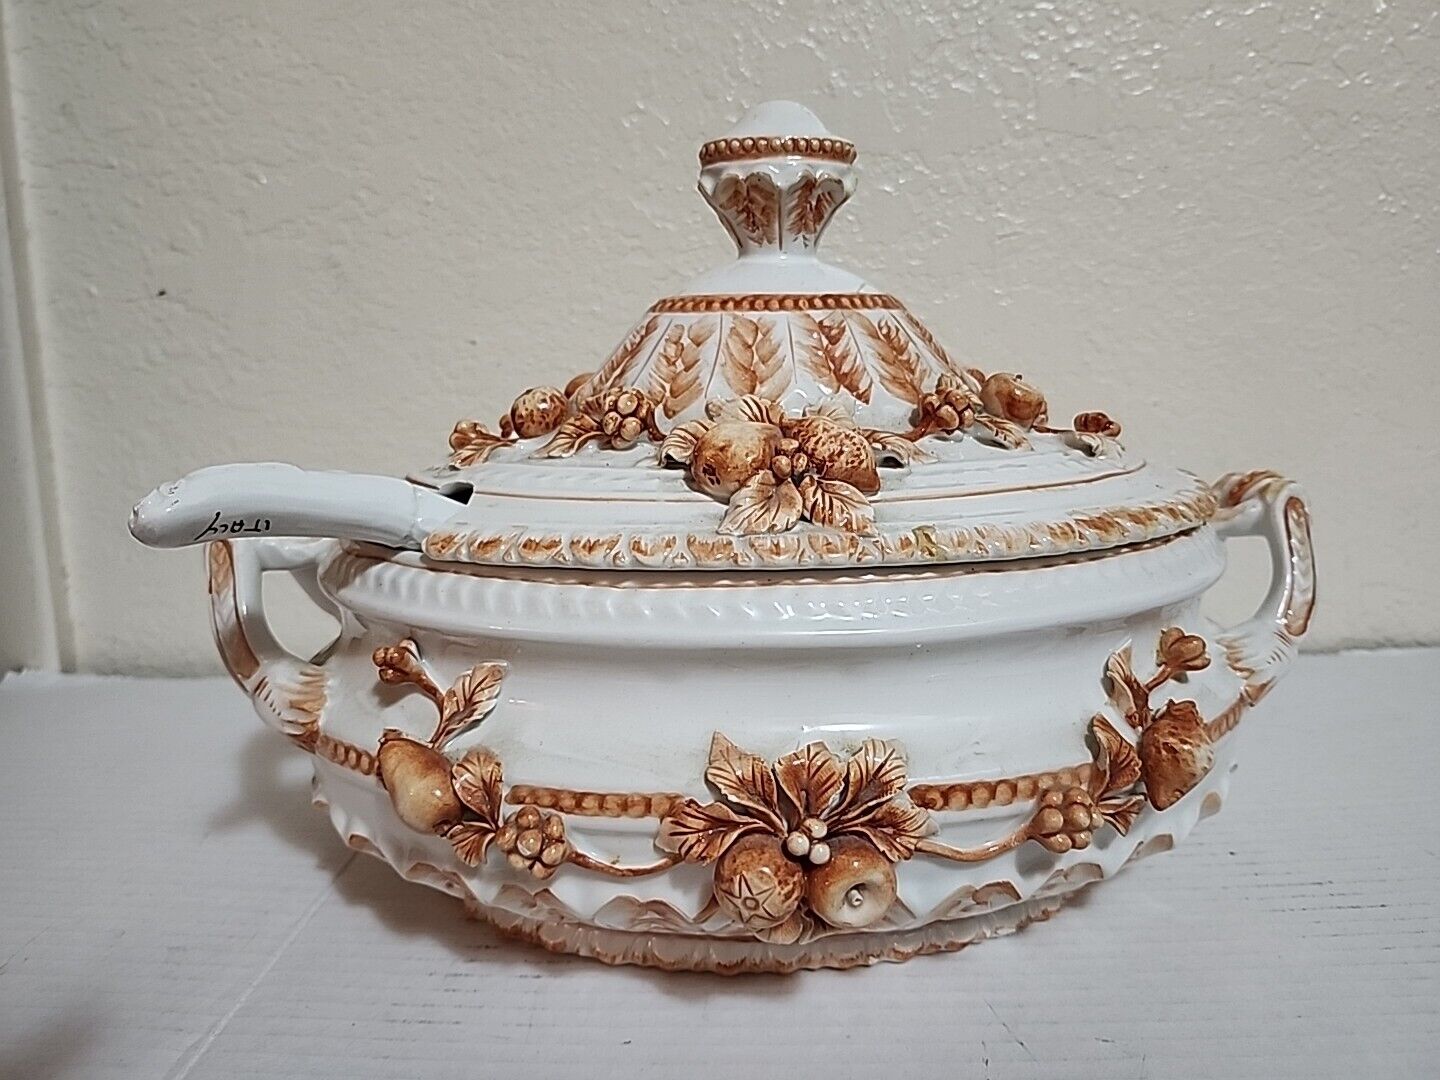 Vintage Italian Tureen Ornate Floral Lidded Pedestal Compote Italy Capodimonte